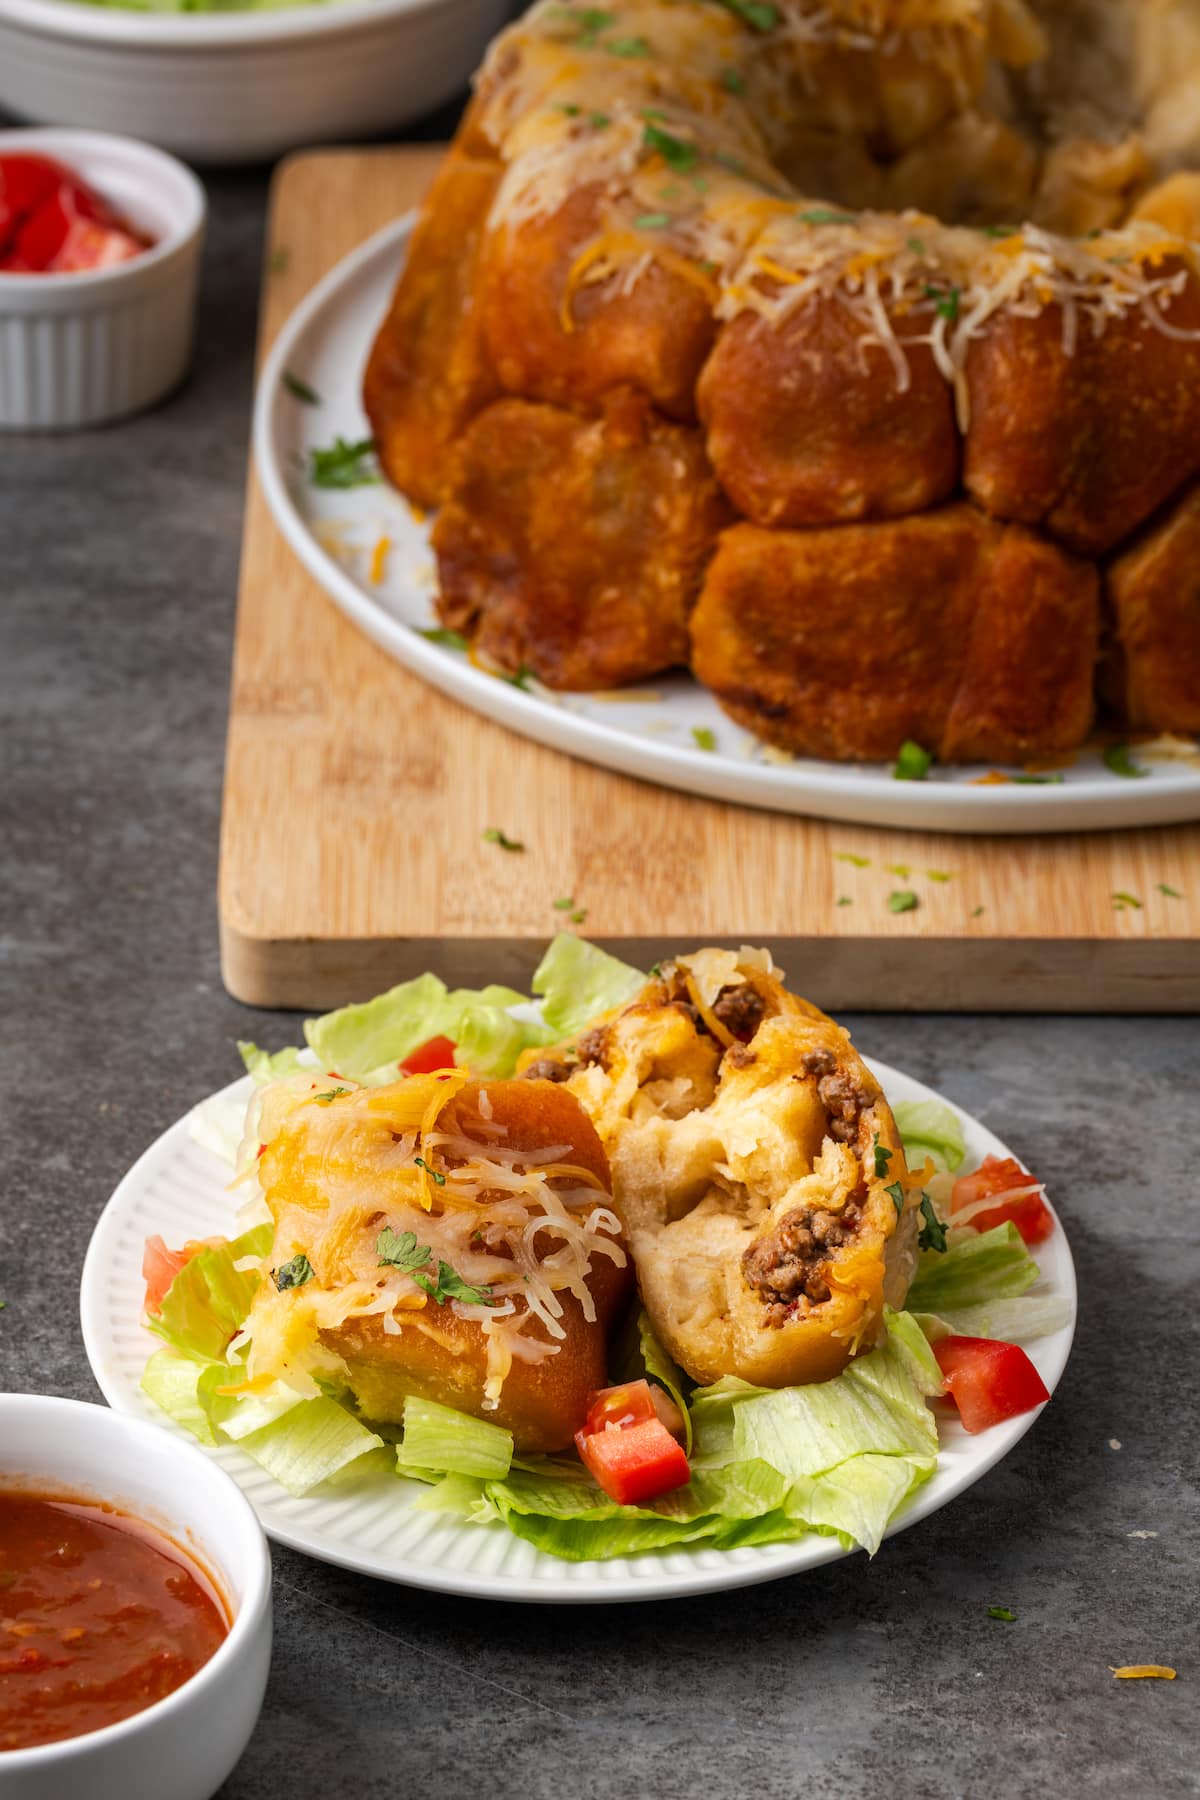 Taco monkey bread bites served on a plate with lettuce and diced tomatoes, with the full monkey bread in the background.